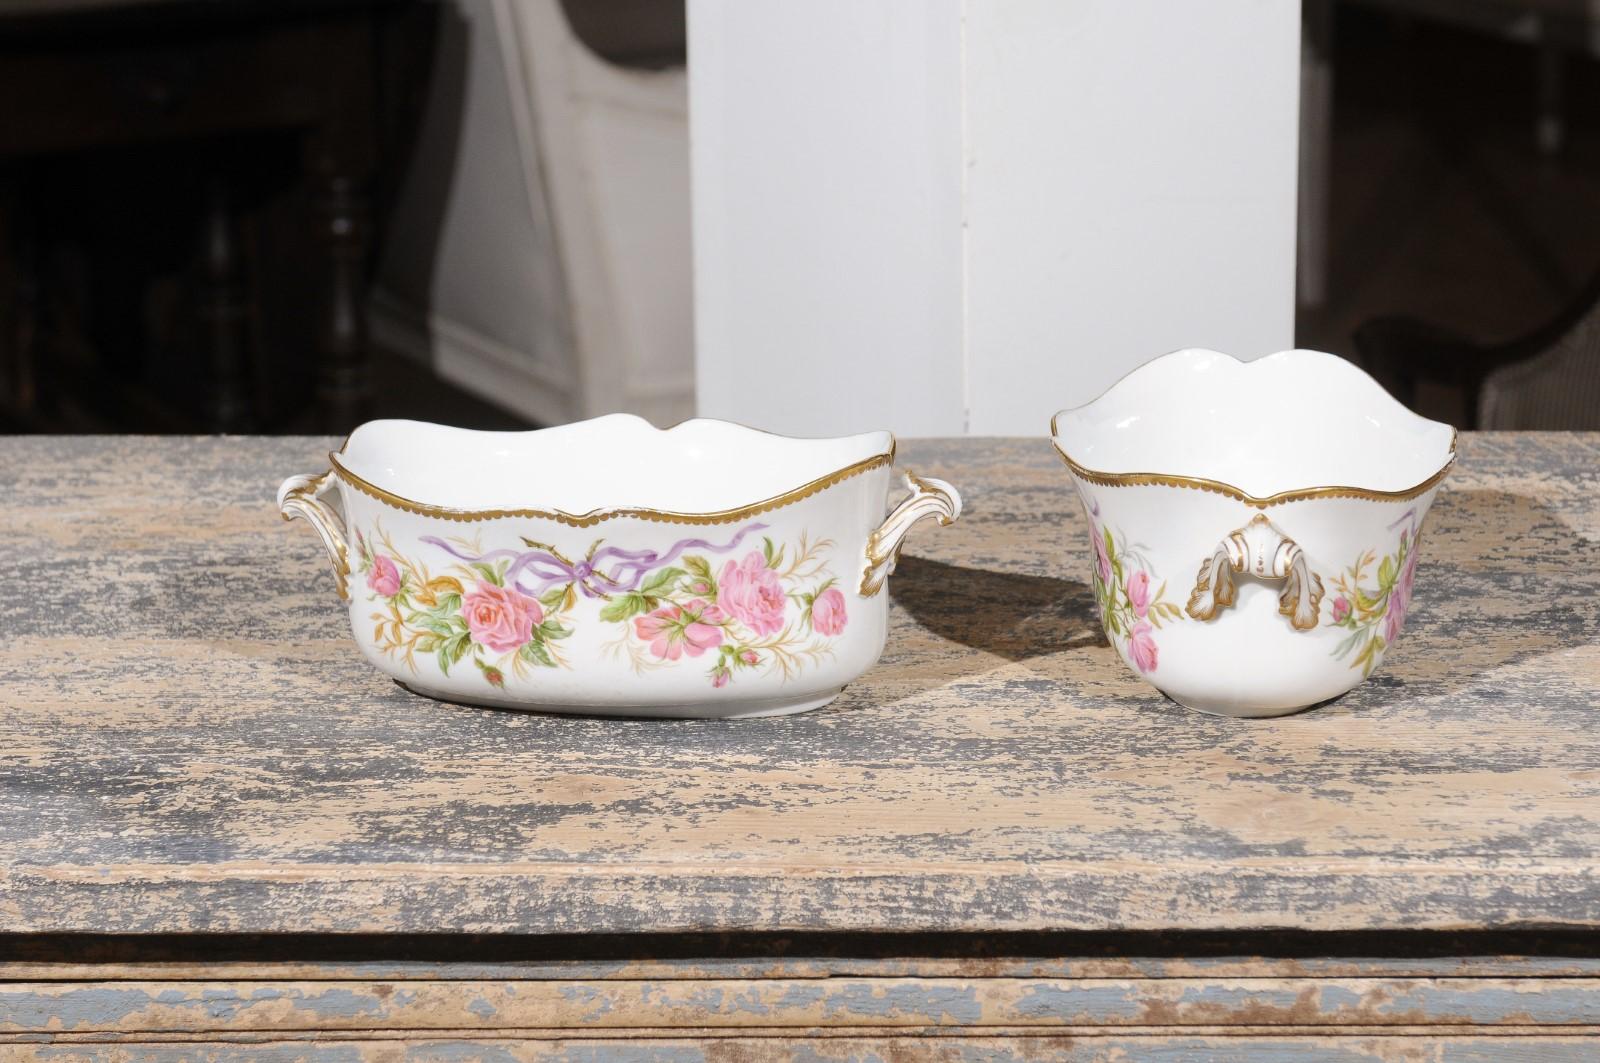 English Porcelain Bowls Depicting Bouquets of Pink Roses with Gilt Accents 5